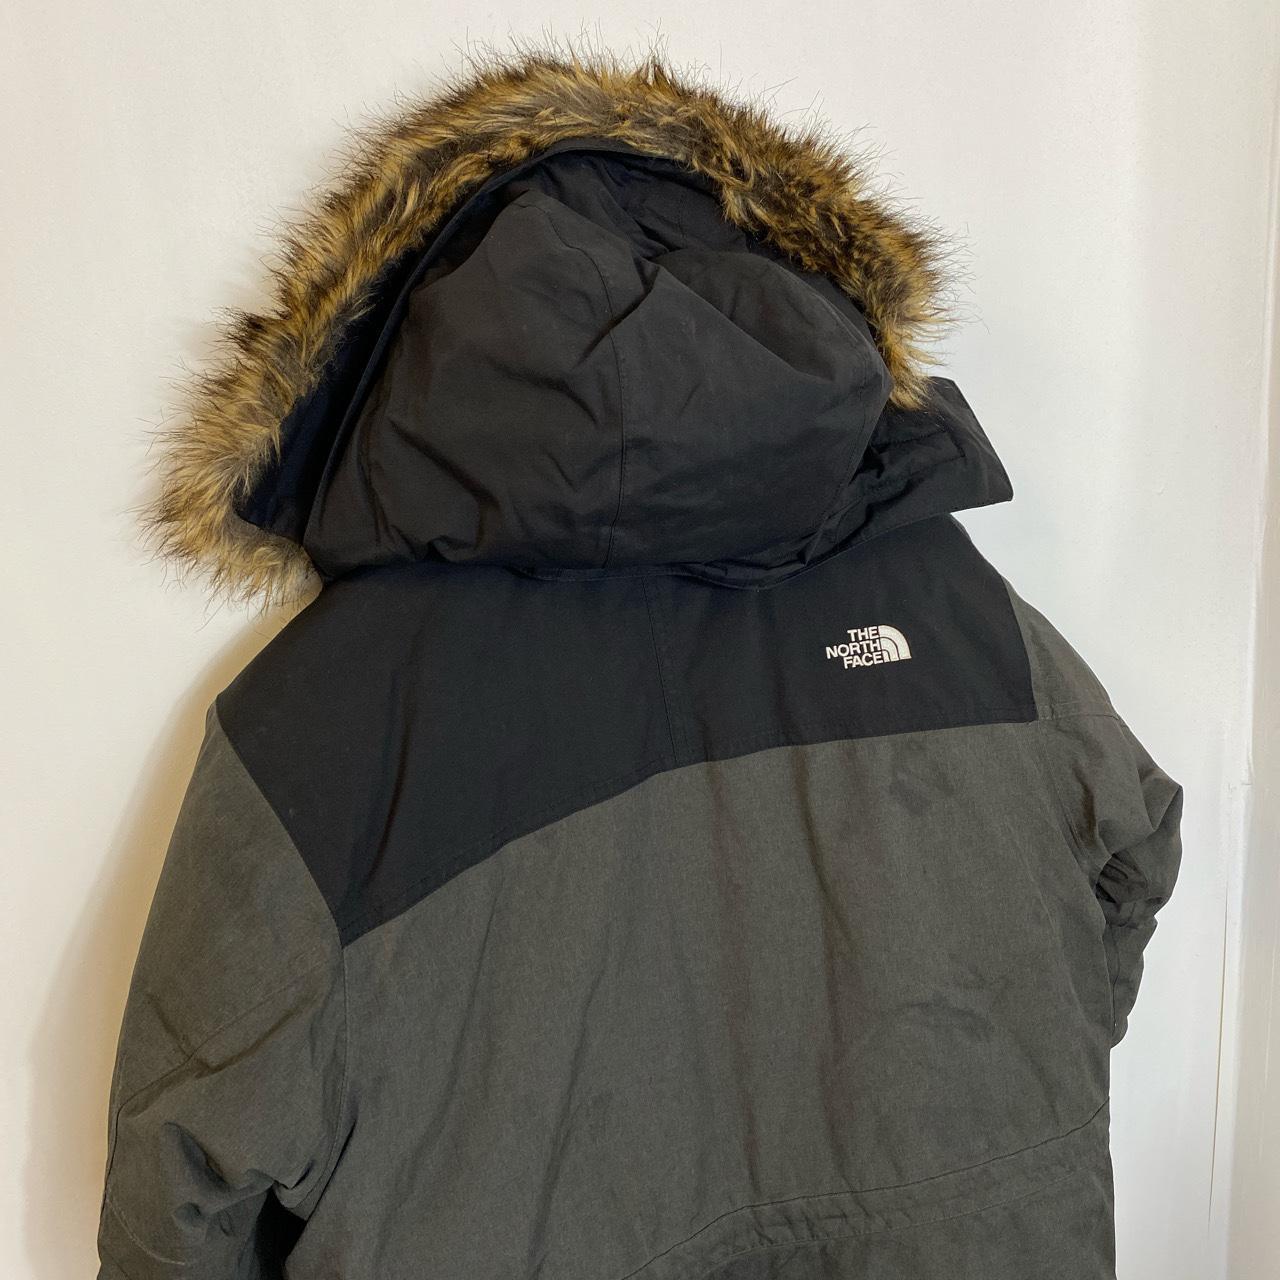 The North Face Grey & Black Insulated Padded Parka... - Depop